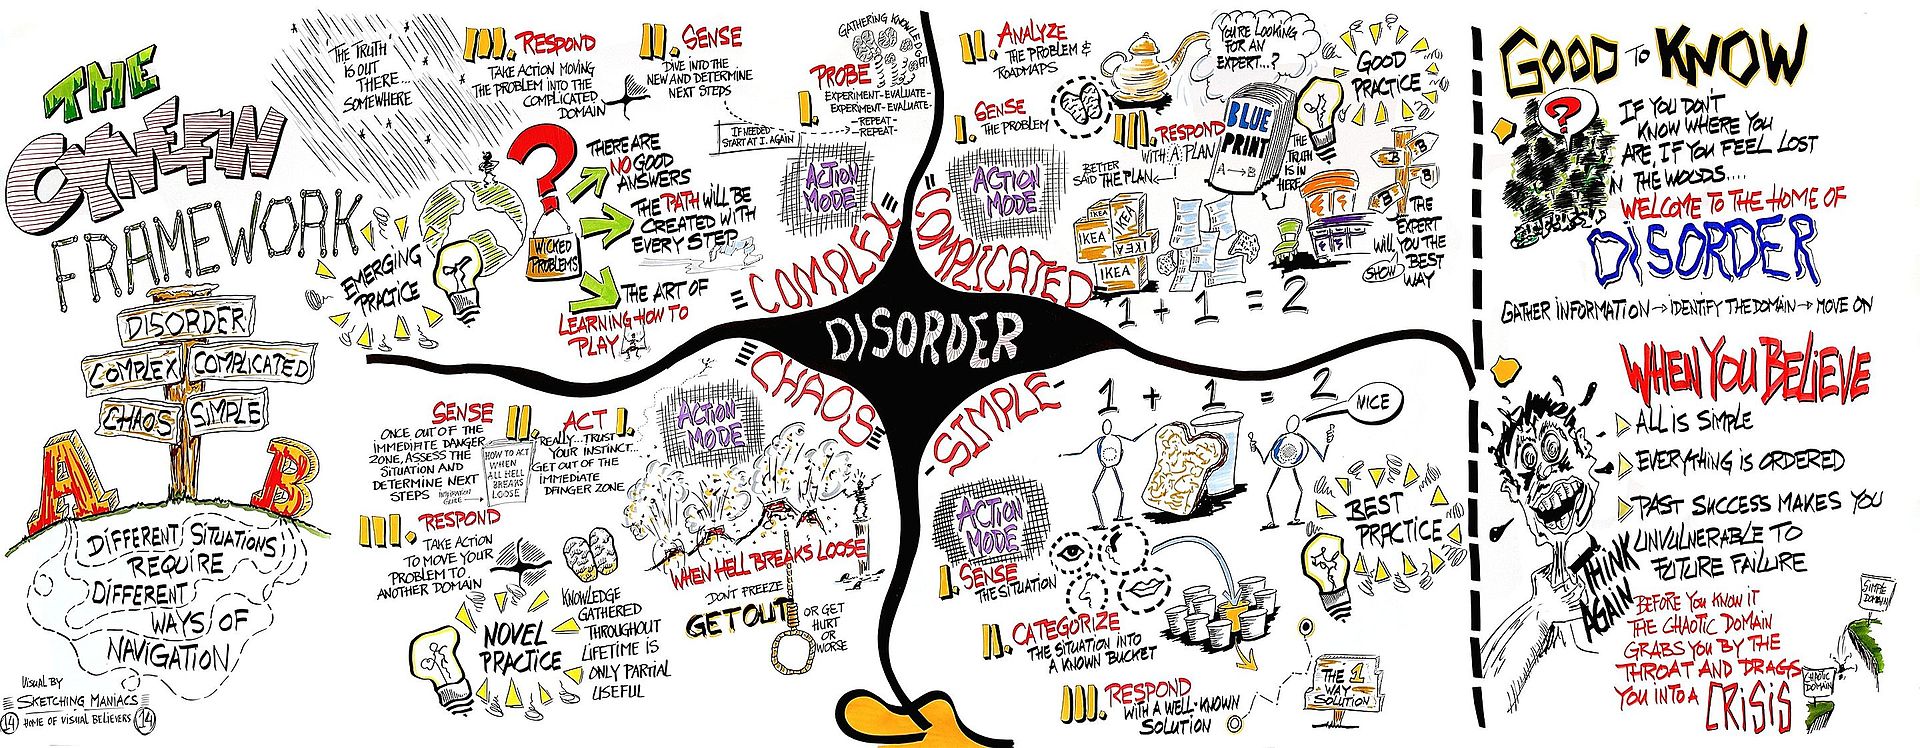 Cynefin framework visualized by Edwin Stoop of Sketching Maniacs